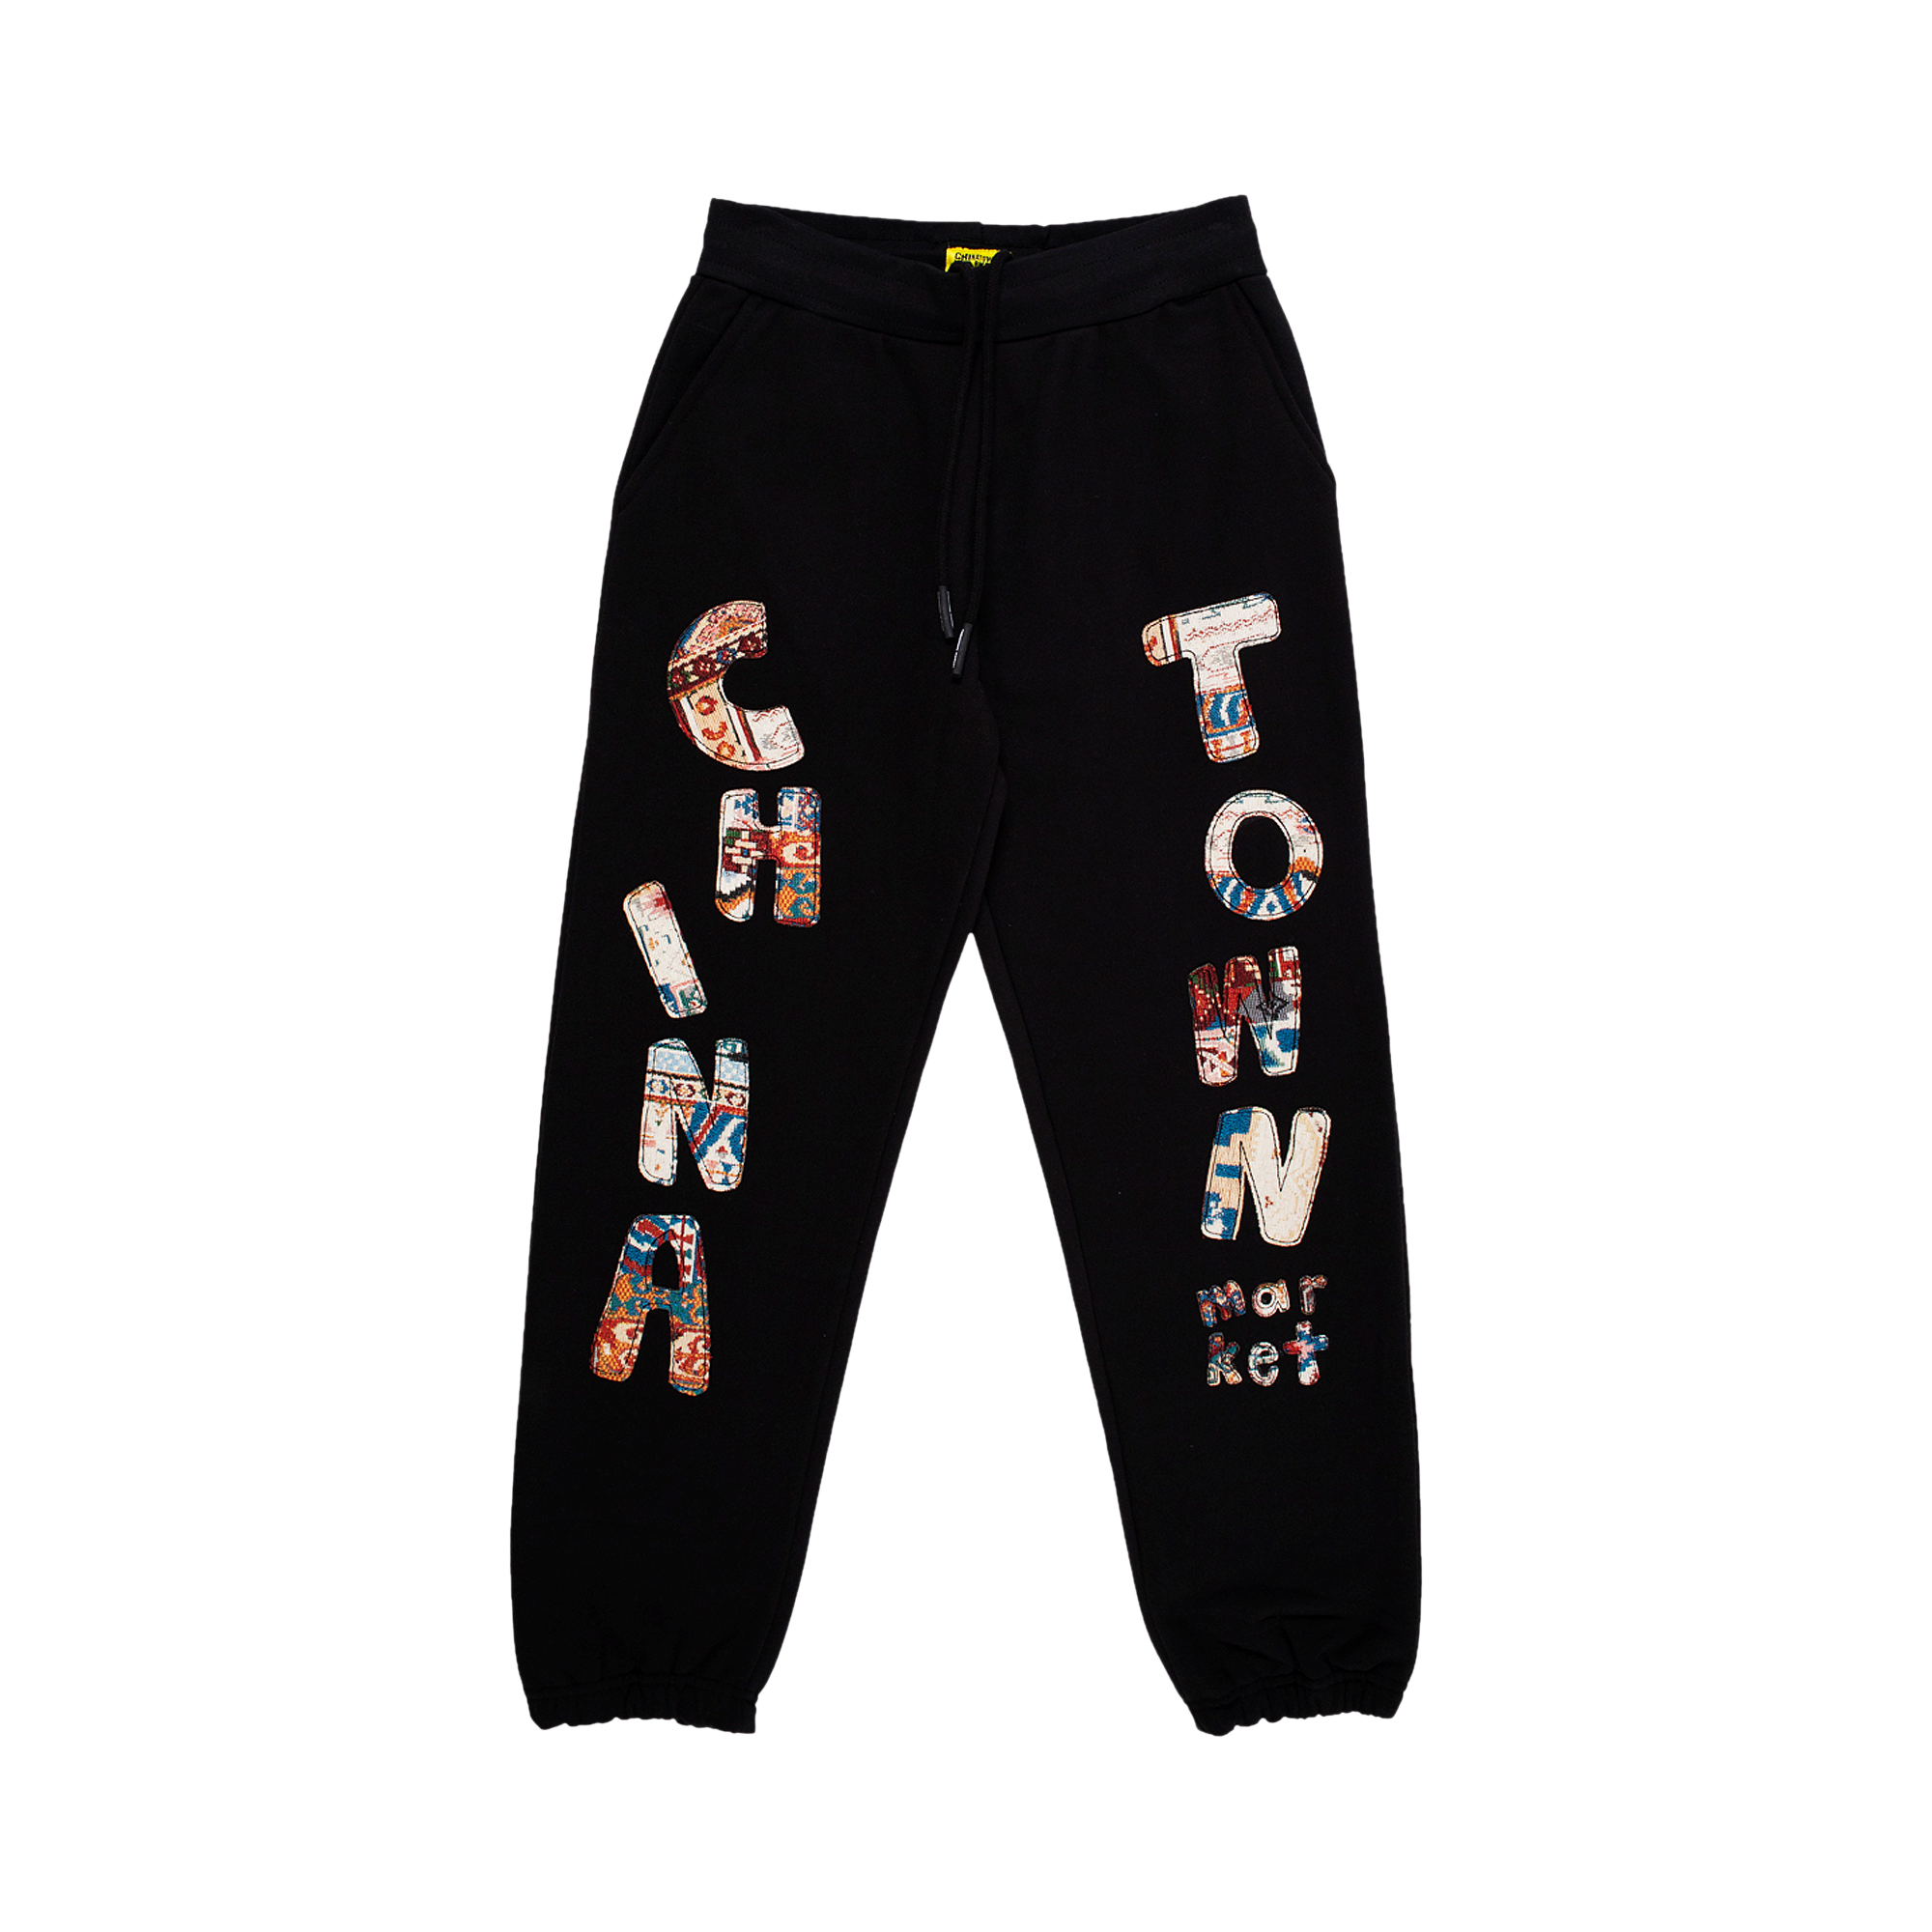 Buy Chinatown Market Bottoms: New Releases u0026 Iconic Styles | GOAT